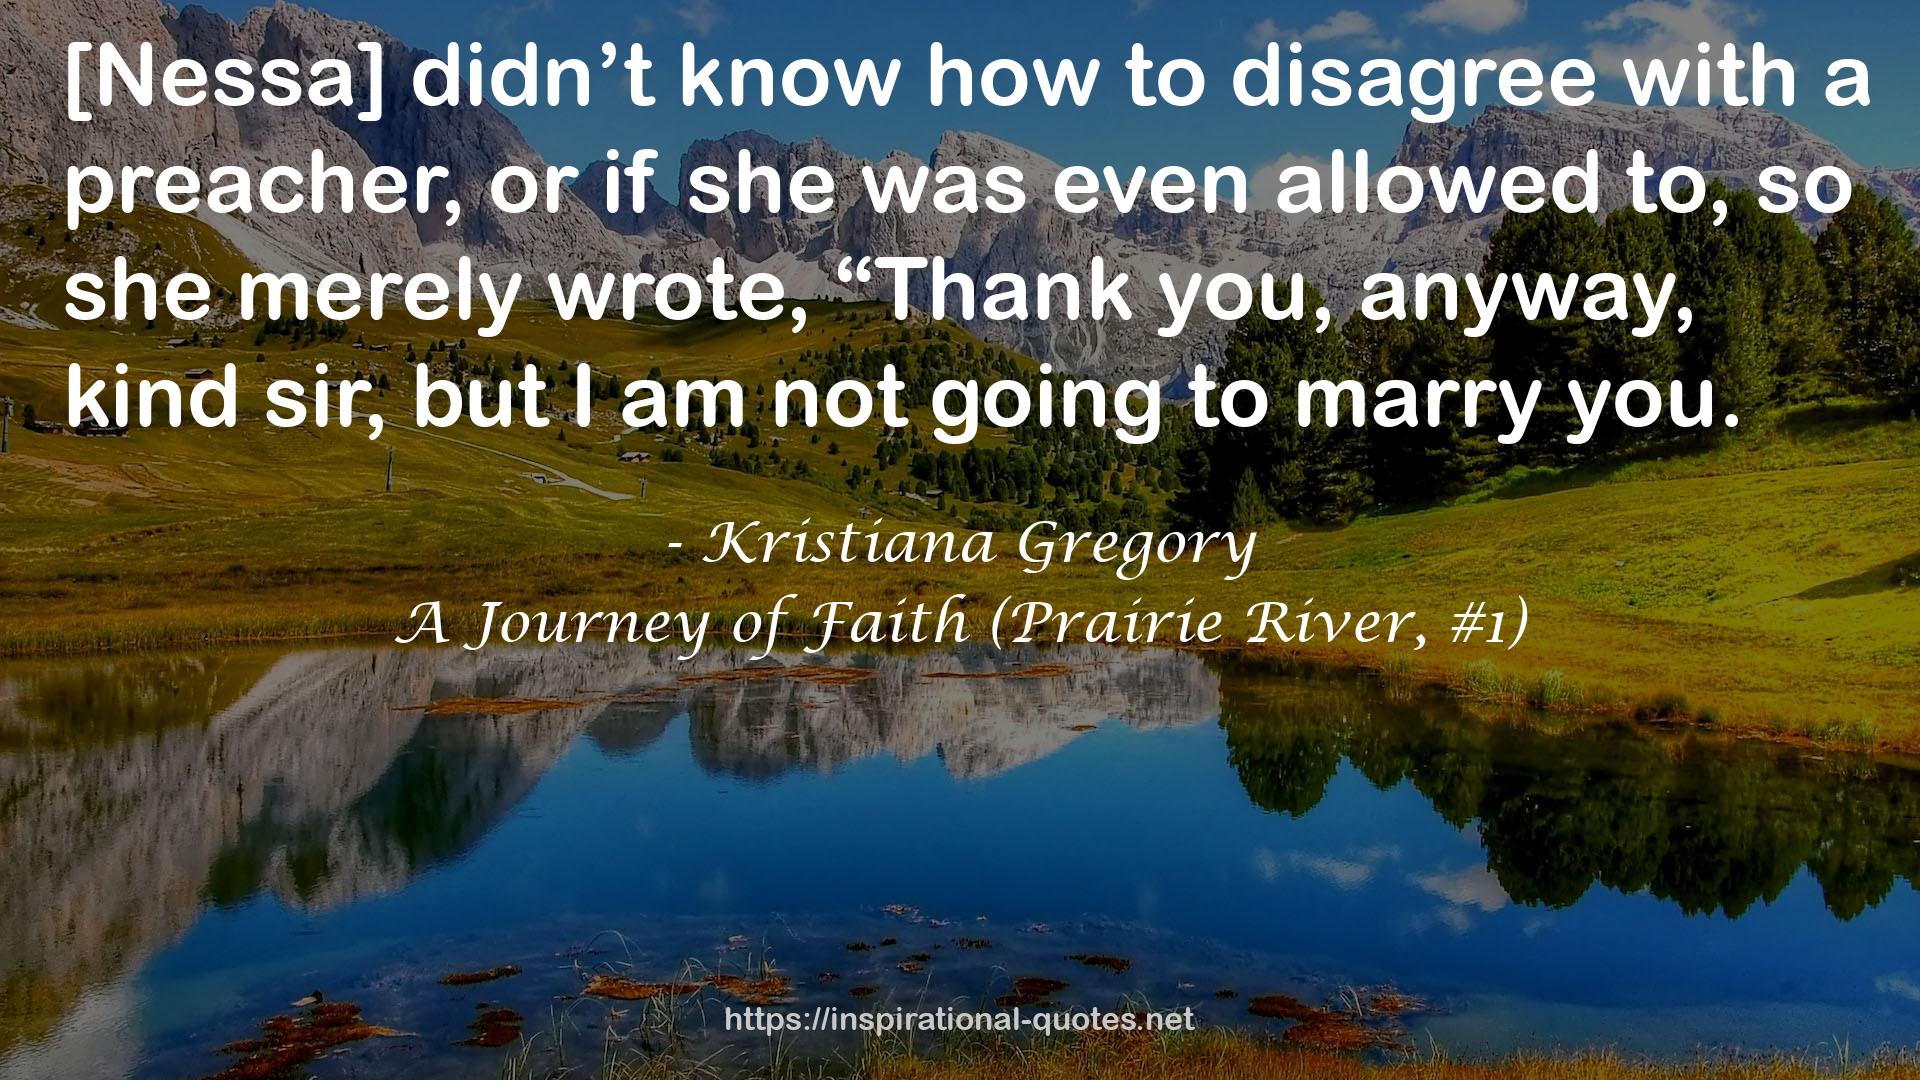 A Journey of Faith (Prairie River, #1) QUOTES